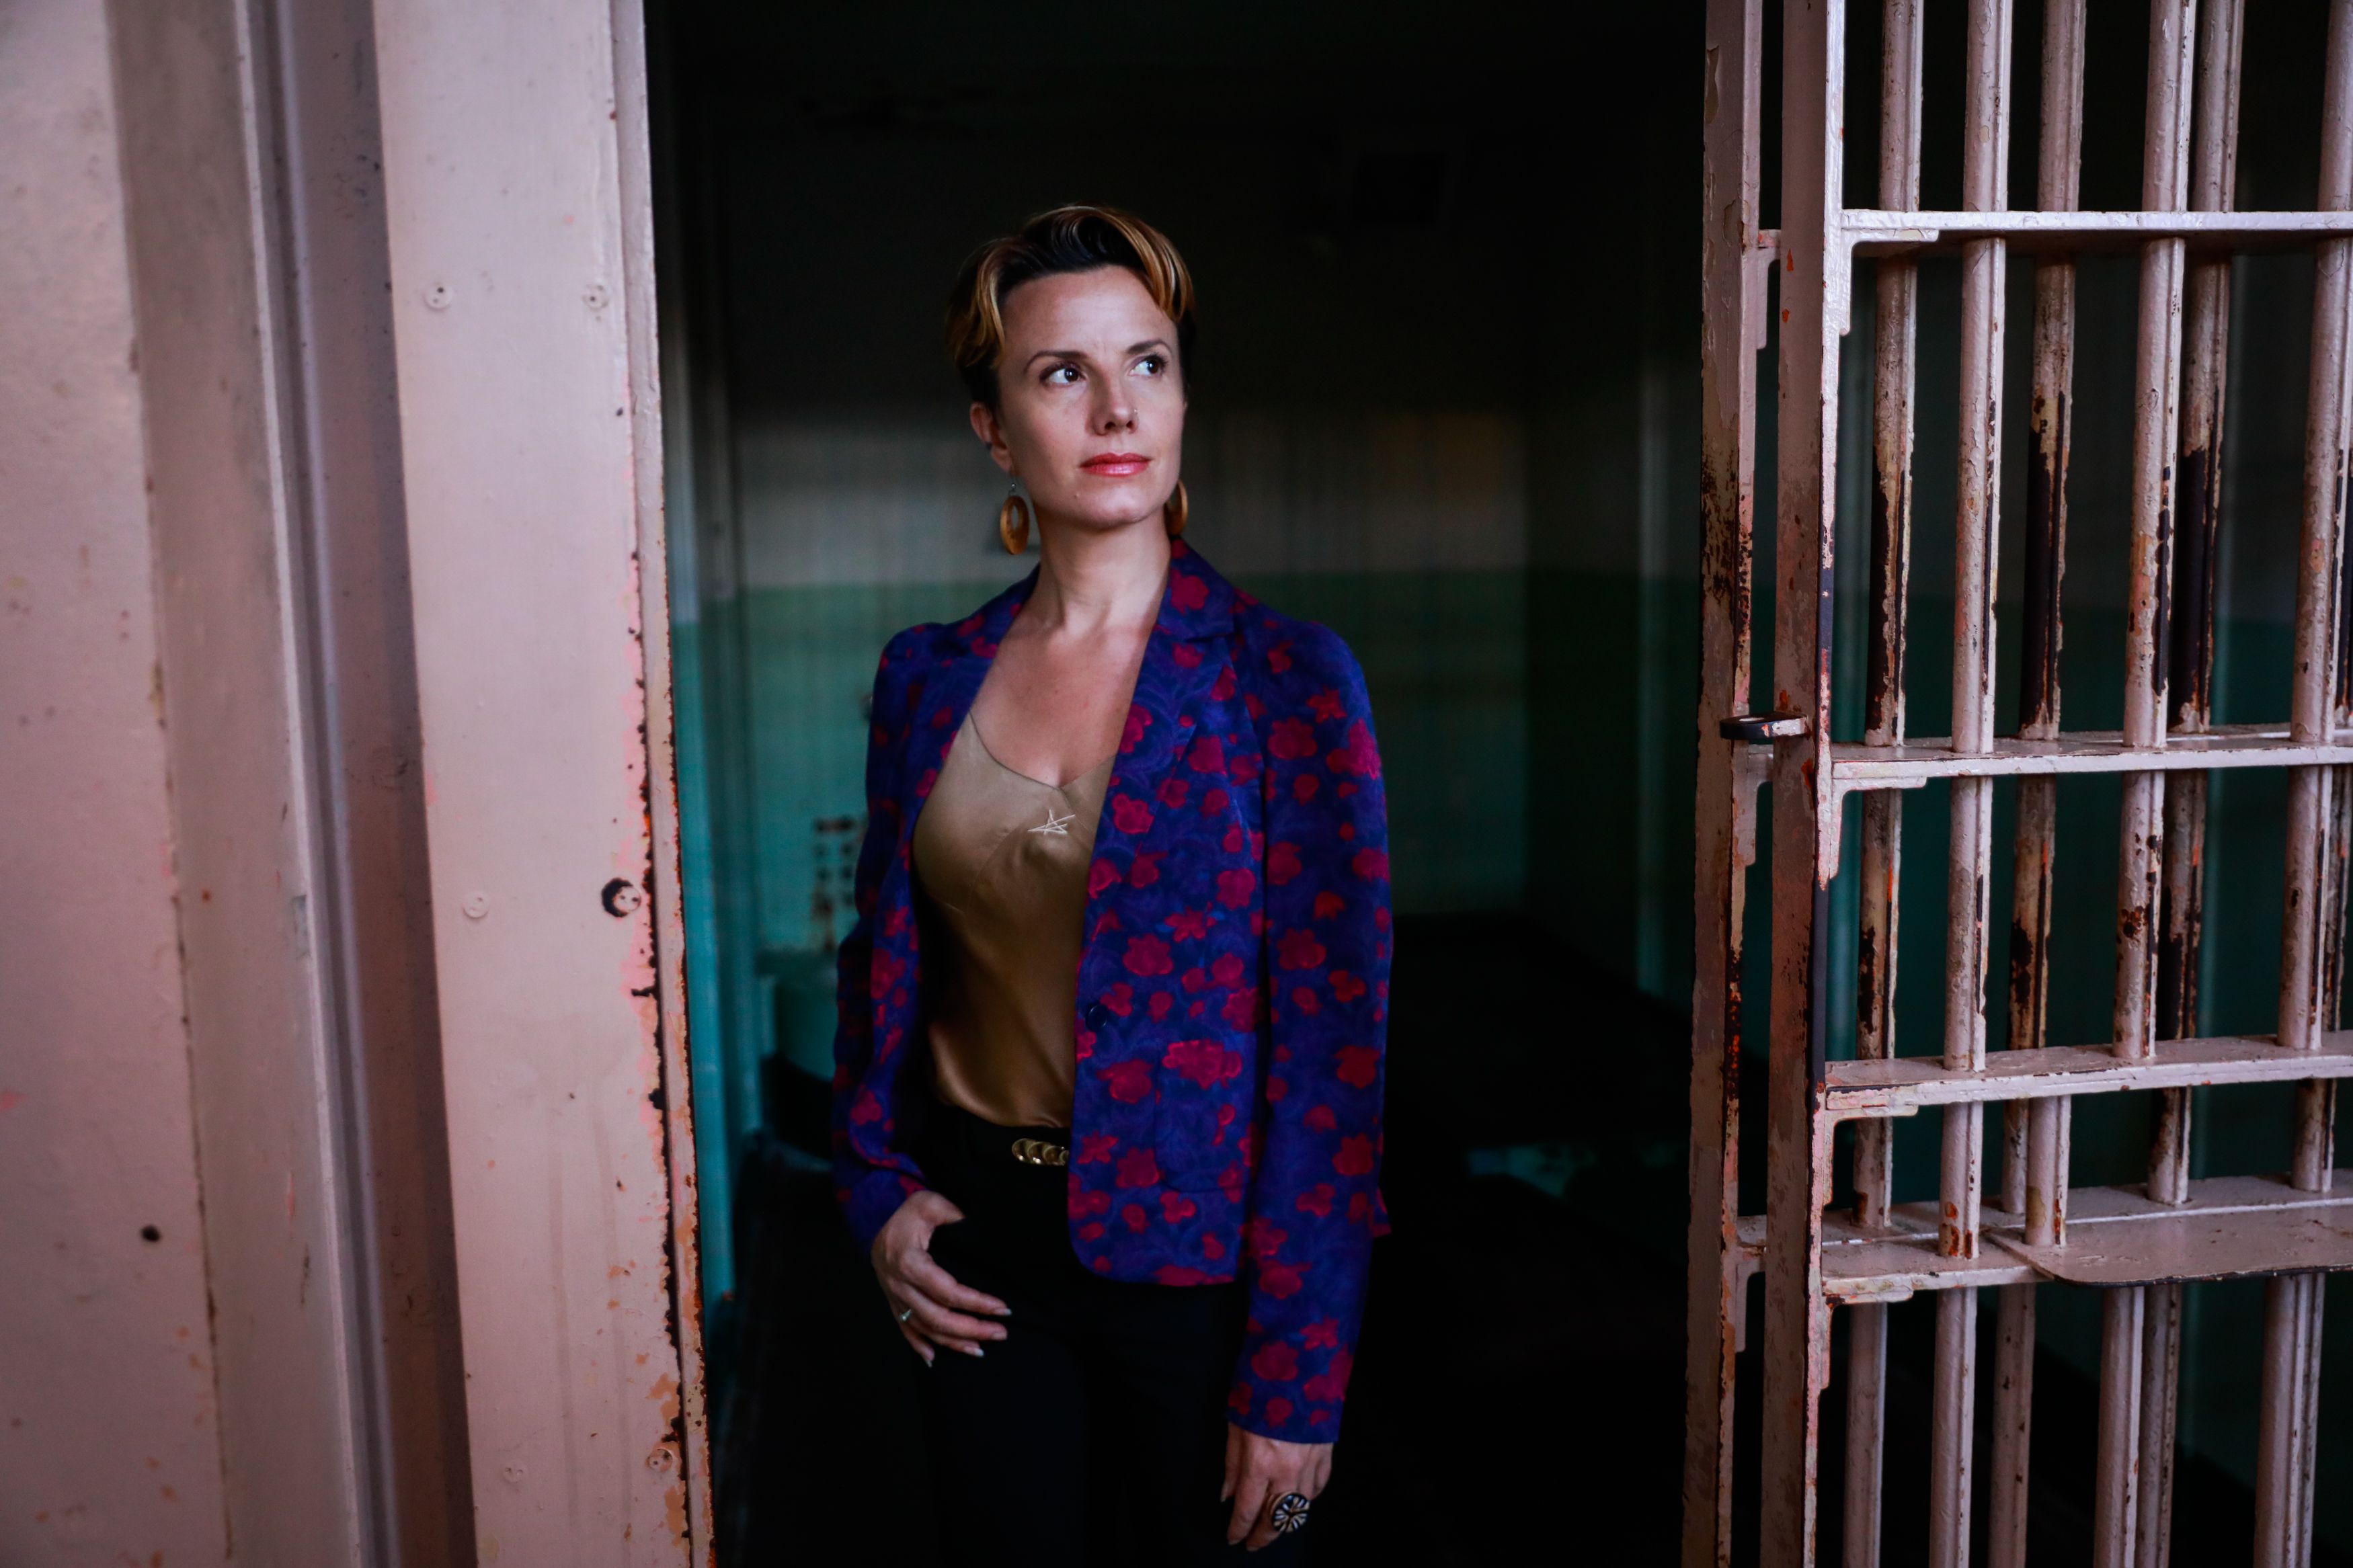 Journalist and artist Sarah Shourd stands for a portrait in a prison cell on Alcatraz Island.
Image by Gabrielle Lurie, The Chronicle. United States, 2019.